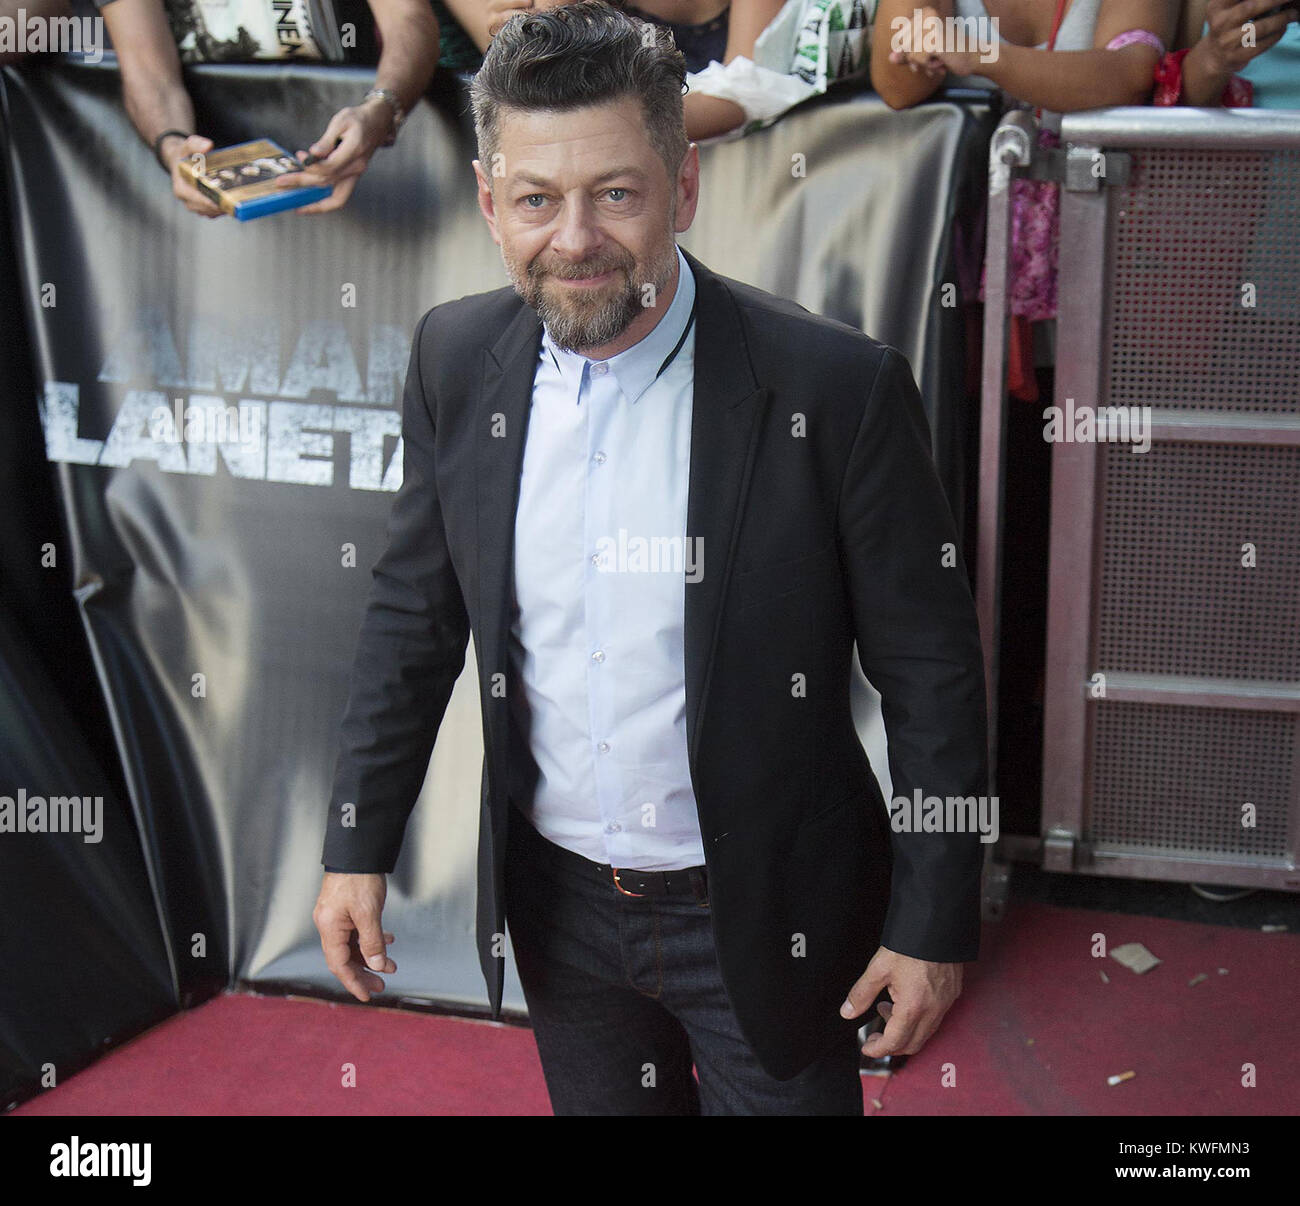 MADRID, SPAIN - JULY 16: Andy Serkis attends the 'Dawn of the Planet of the Apes' (El Amanecer del Planeta de los Simios) premiere on July 16, 2014 in Madrid, Spain  People:  Andy Serkis Stock Photo